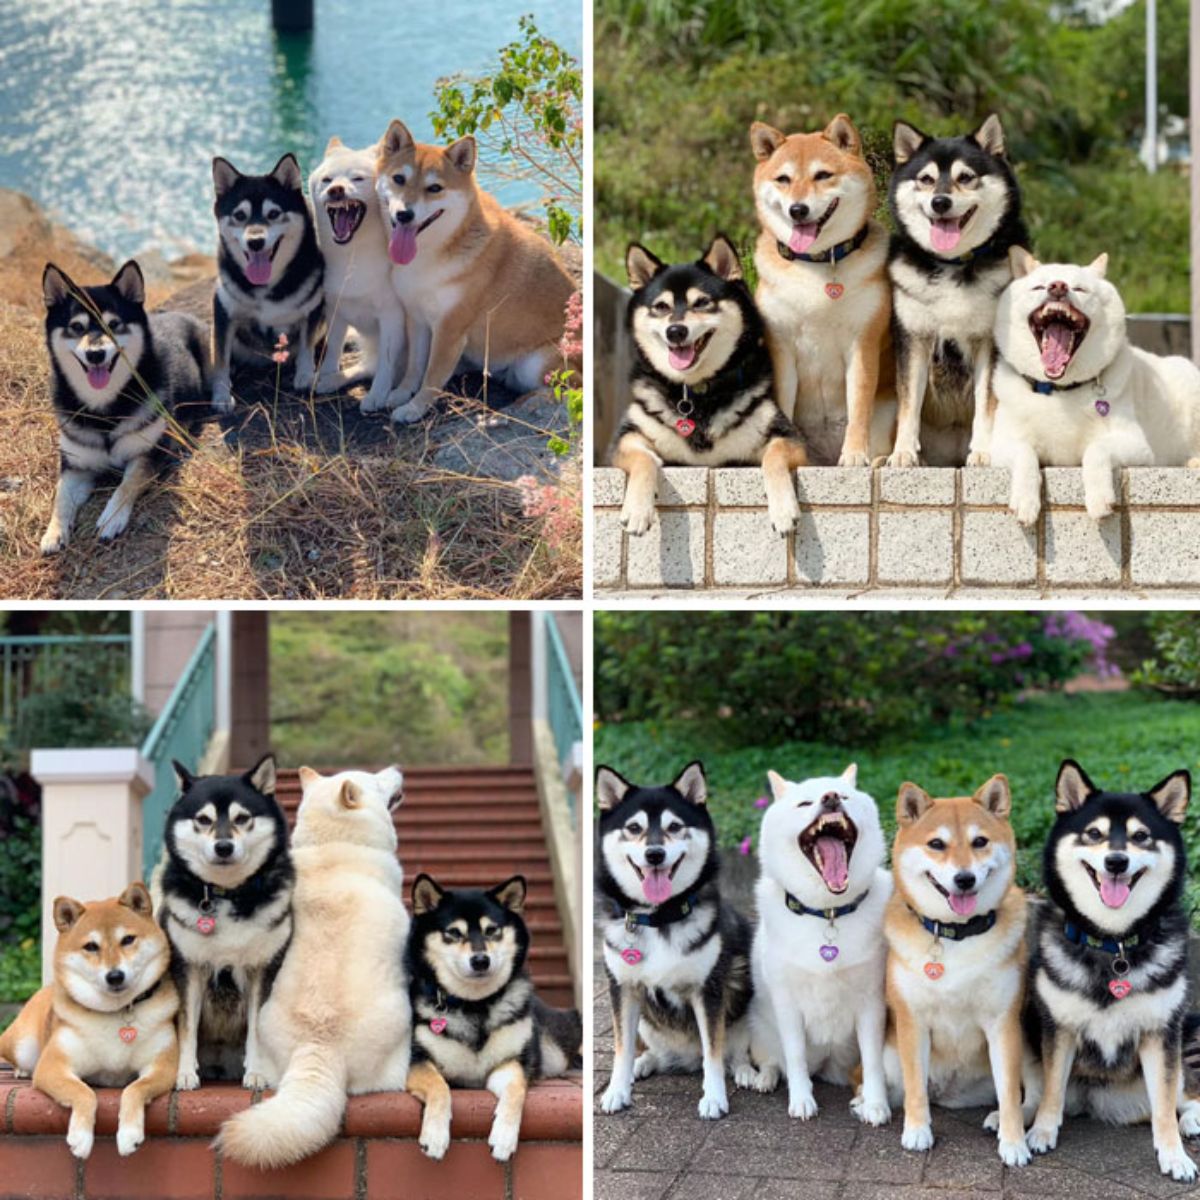 4 photos of 2 black shiba inus, 1 brown shiba inu and 1 white shiba inu posing with the white shiba inu making silly faces or turning away